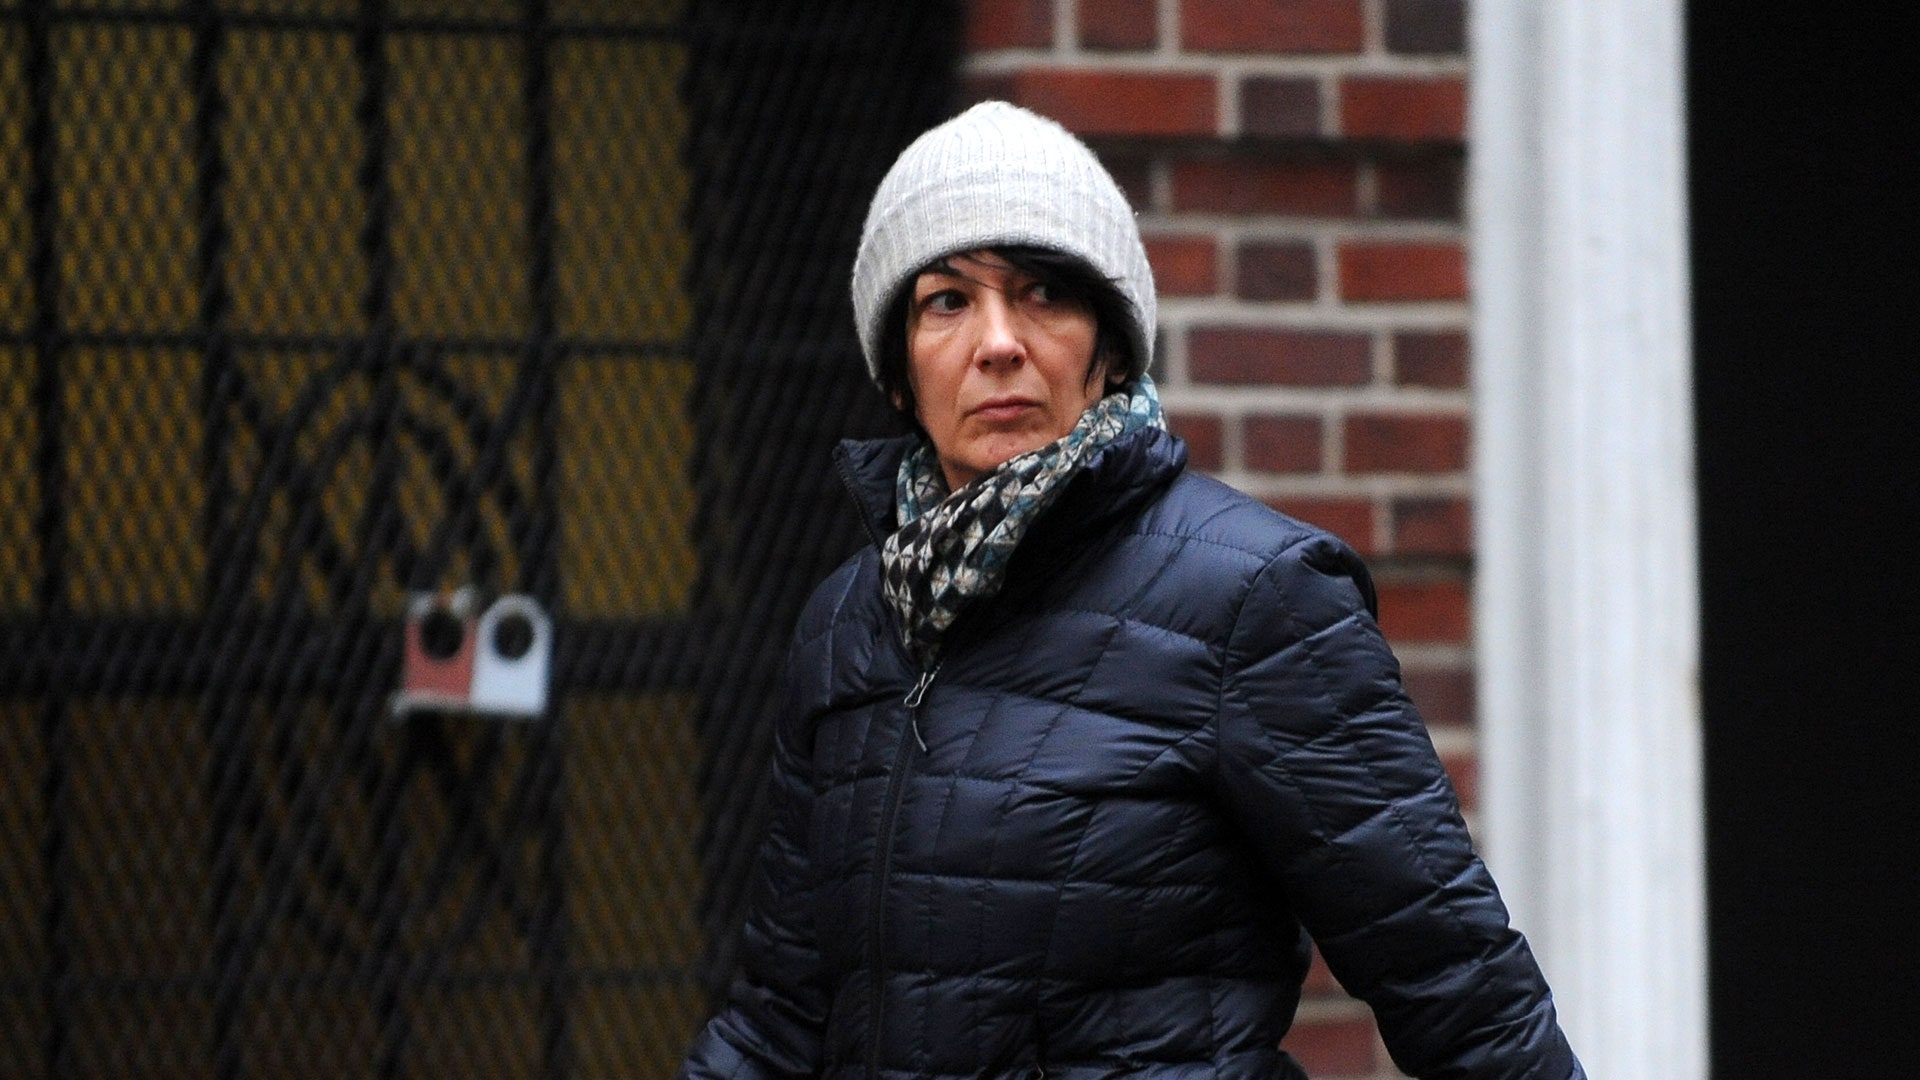 No Ghislaine Maxwell is not a victim of the patriarchy